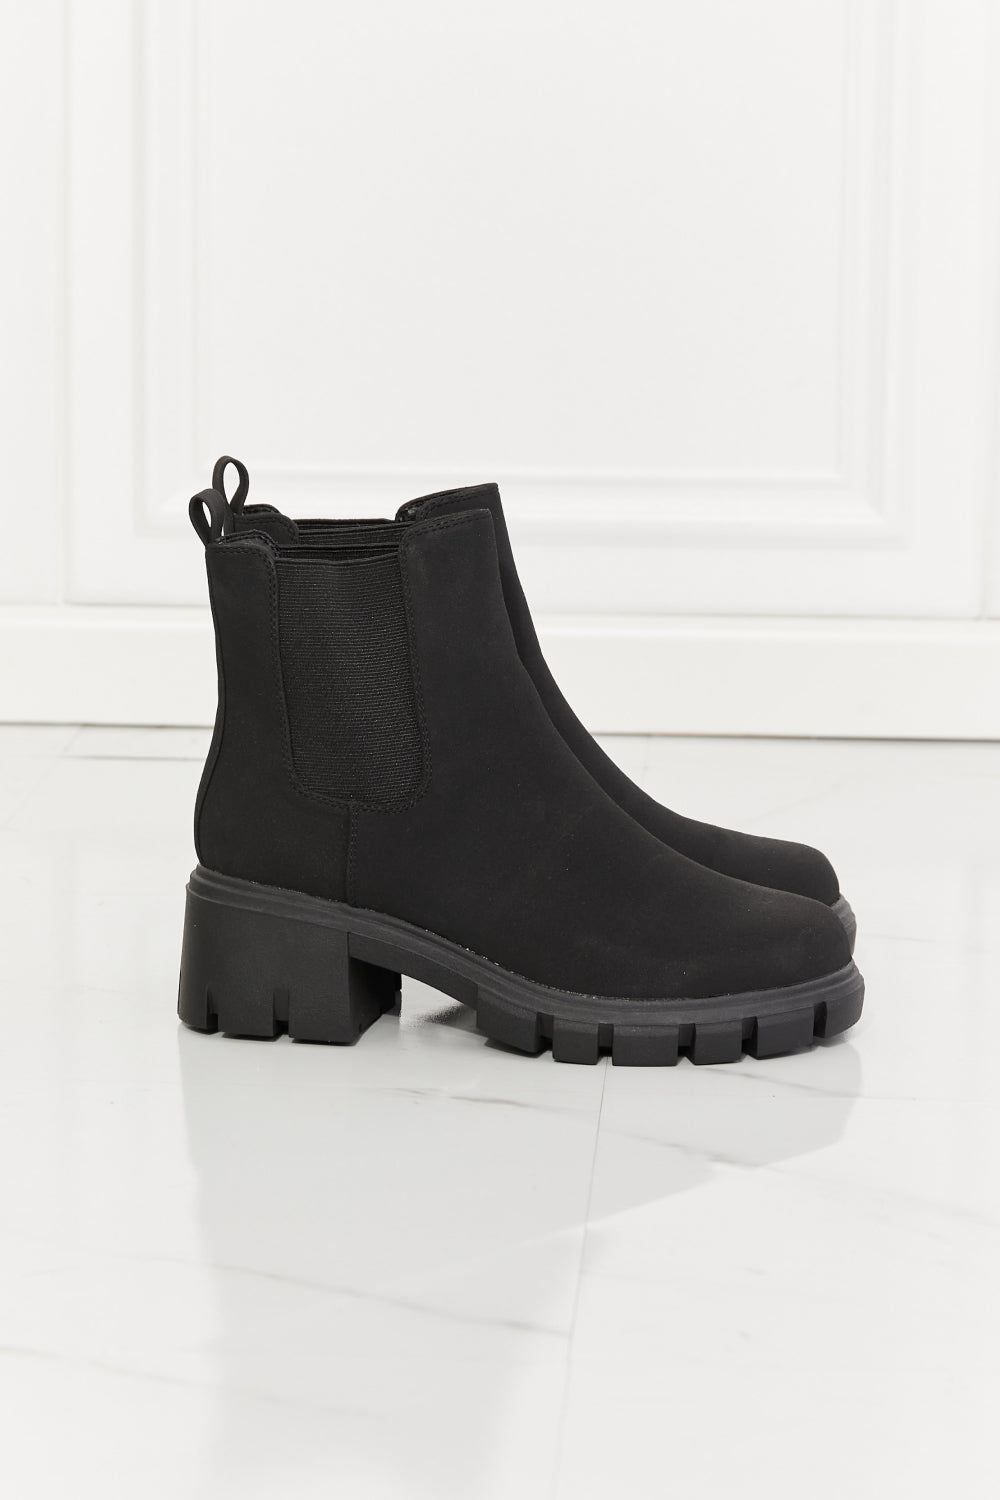 MMShoes Work For It Matte Lug Sole Chelsea Boots in Black - Cheeky Chic Boutique